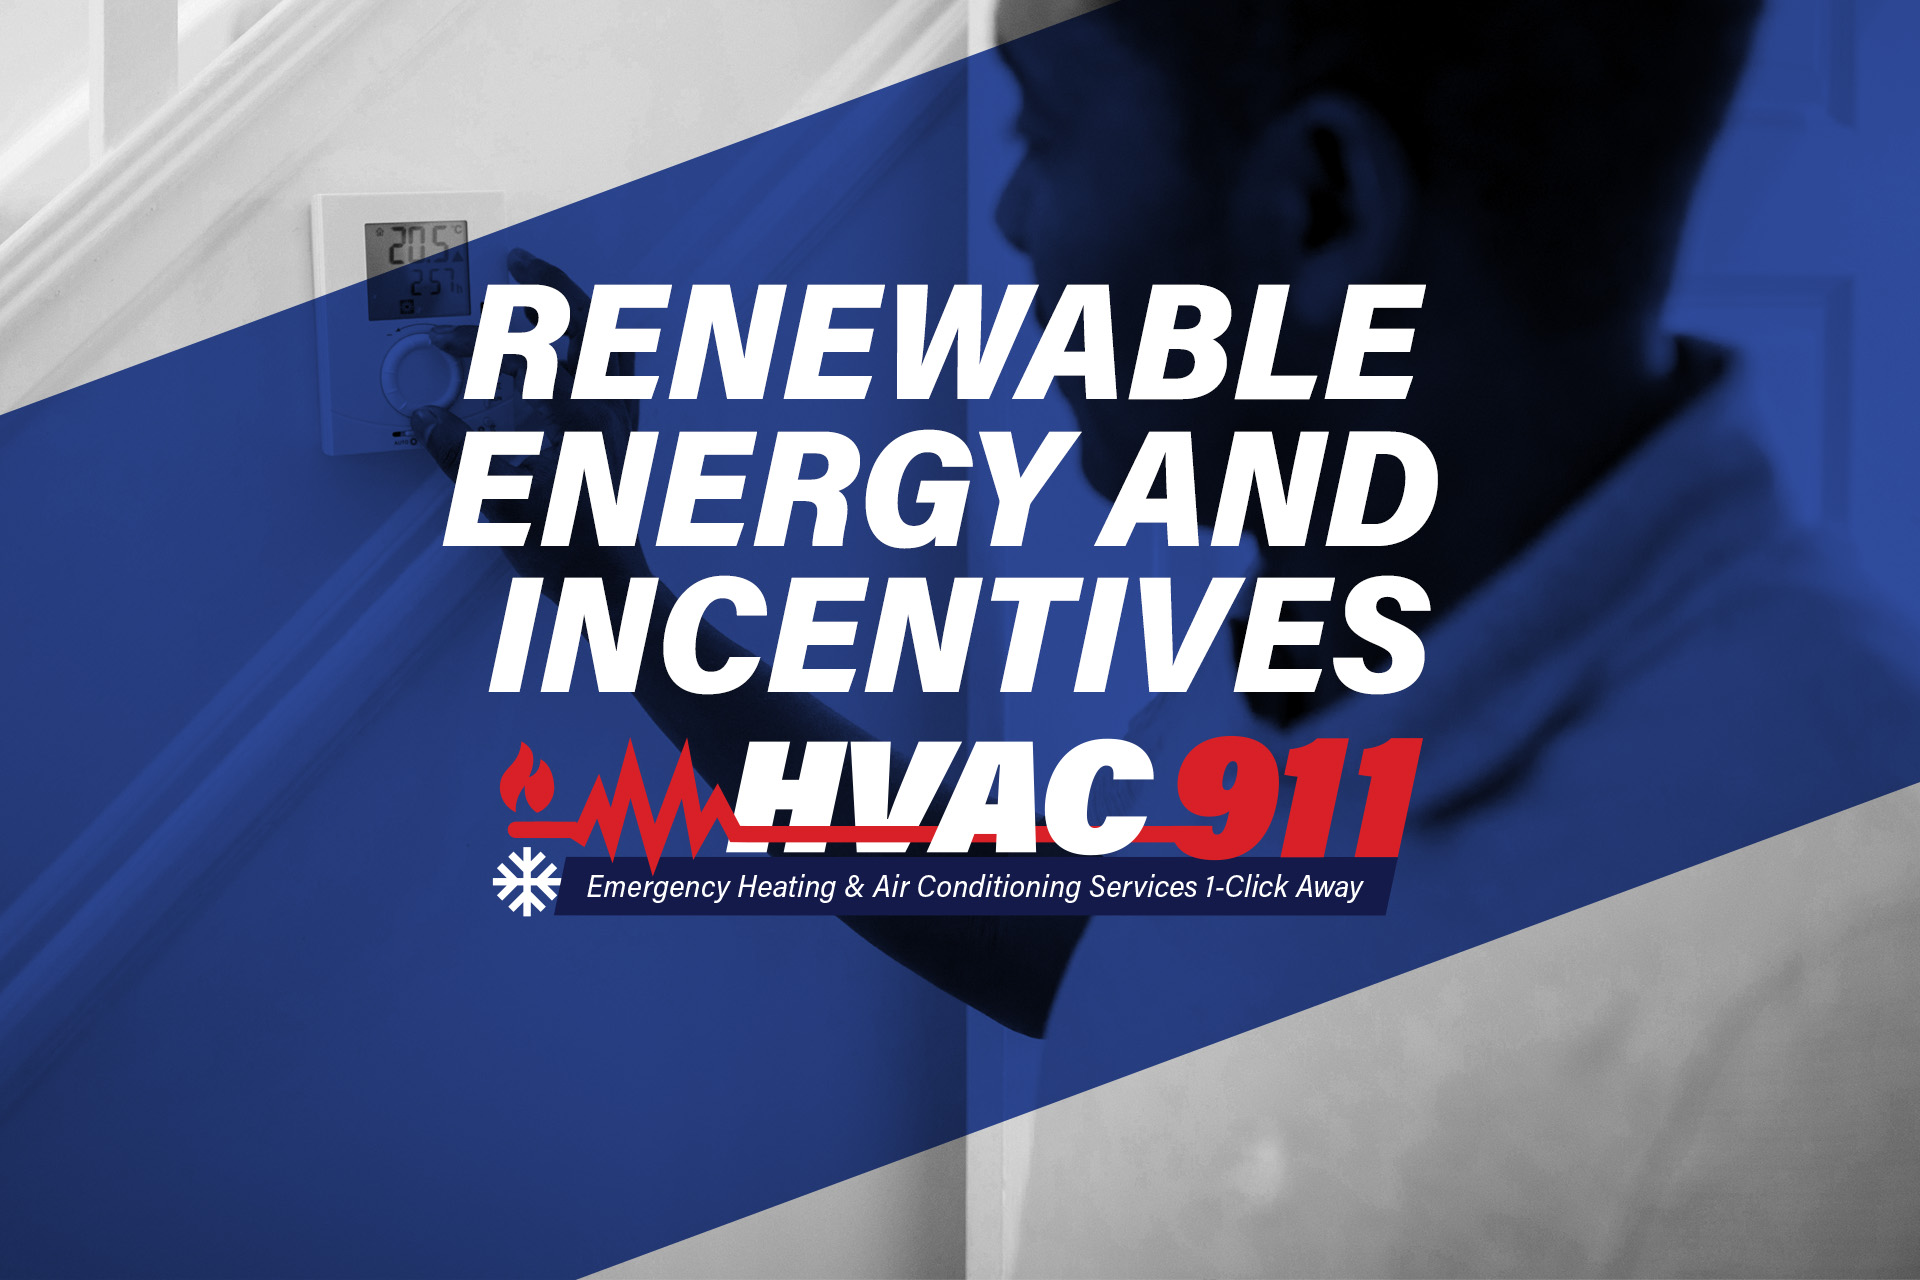 renewable-energy-and-incentives-call-hvac-911-today